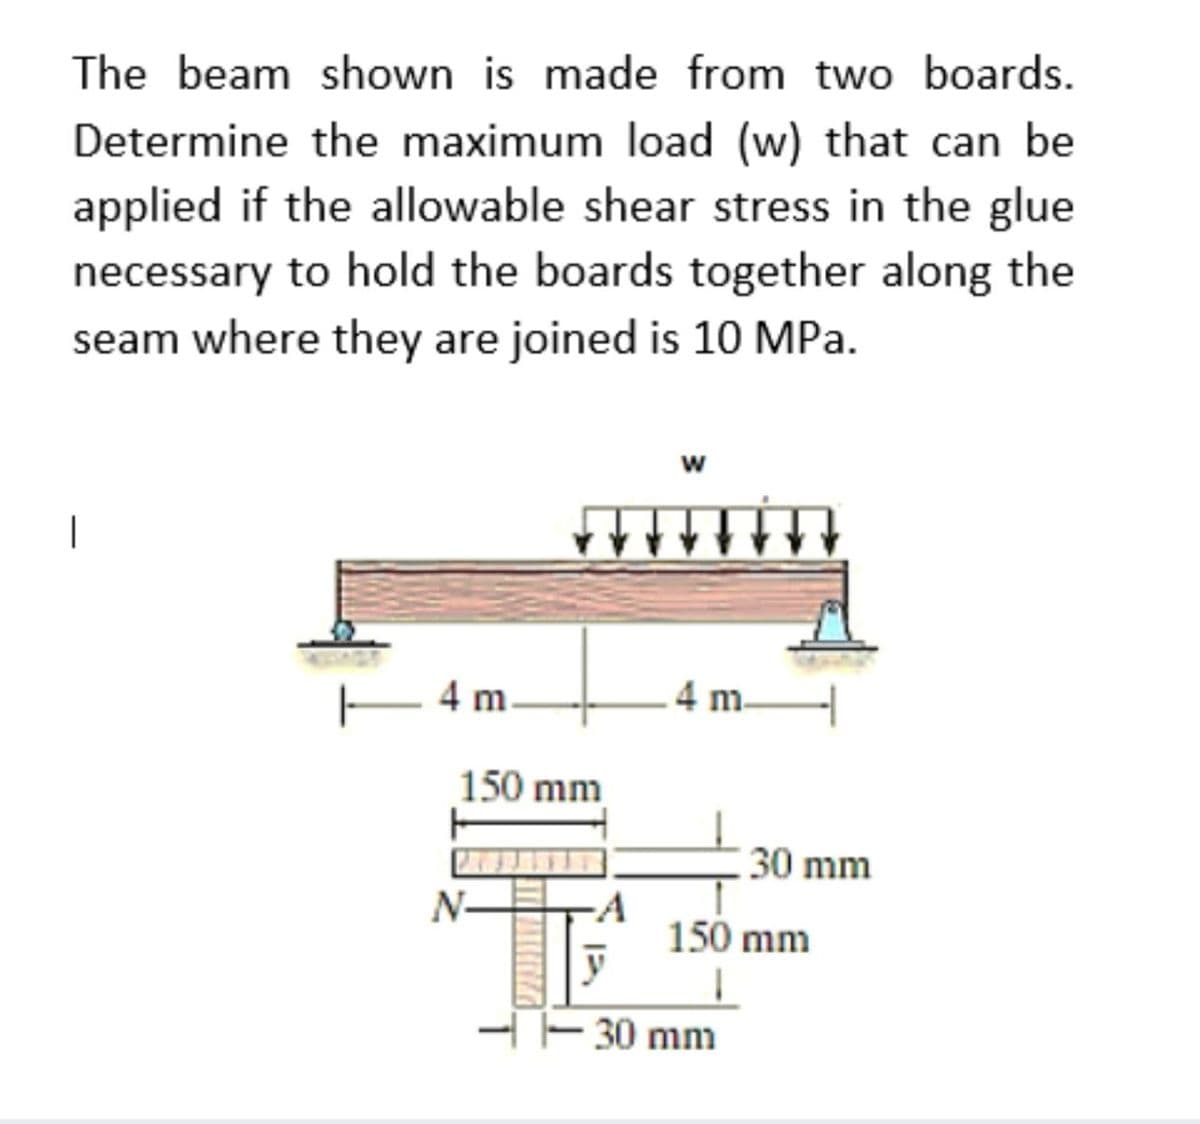 The beam shown is made from two boards.
Determine the maximum load (w) that can be
applied if the allowable shear stress in the glue
necessary to hold the boards together along the
seam where they are joined is 10 MPa.
w
– 4 m.
4 m-
150 mm
30 mm
N-
-A
150 mm
-E 30 mm
